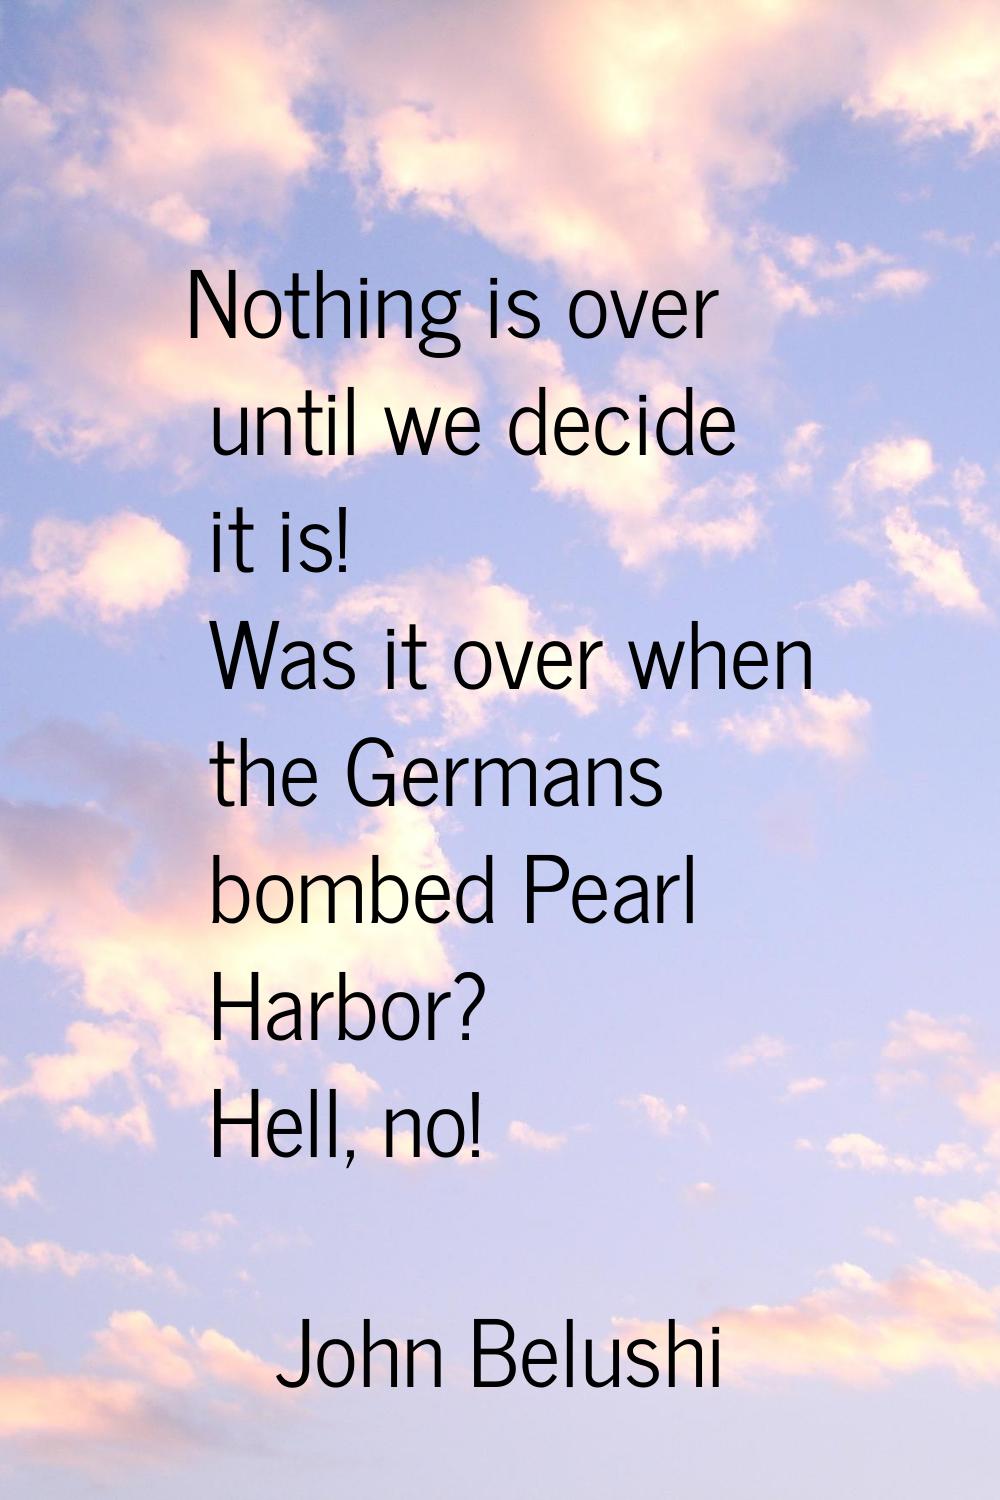 Nothing is over until we decide it is! Was it over when the Germans bombed Pearl Harbor? Hell, no!